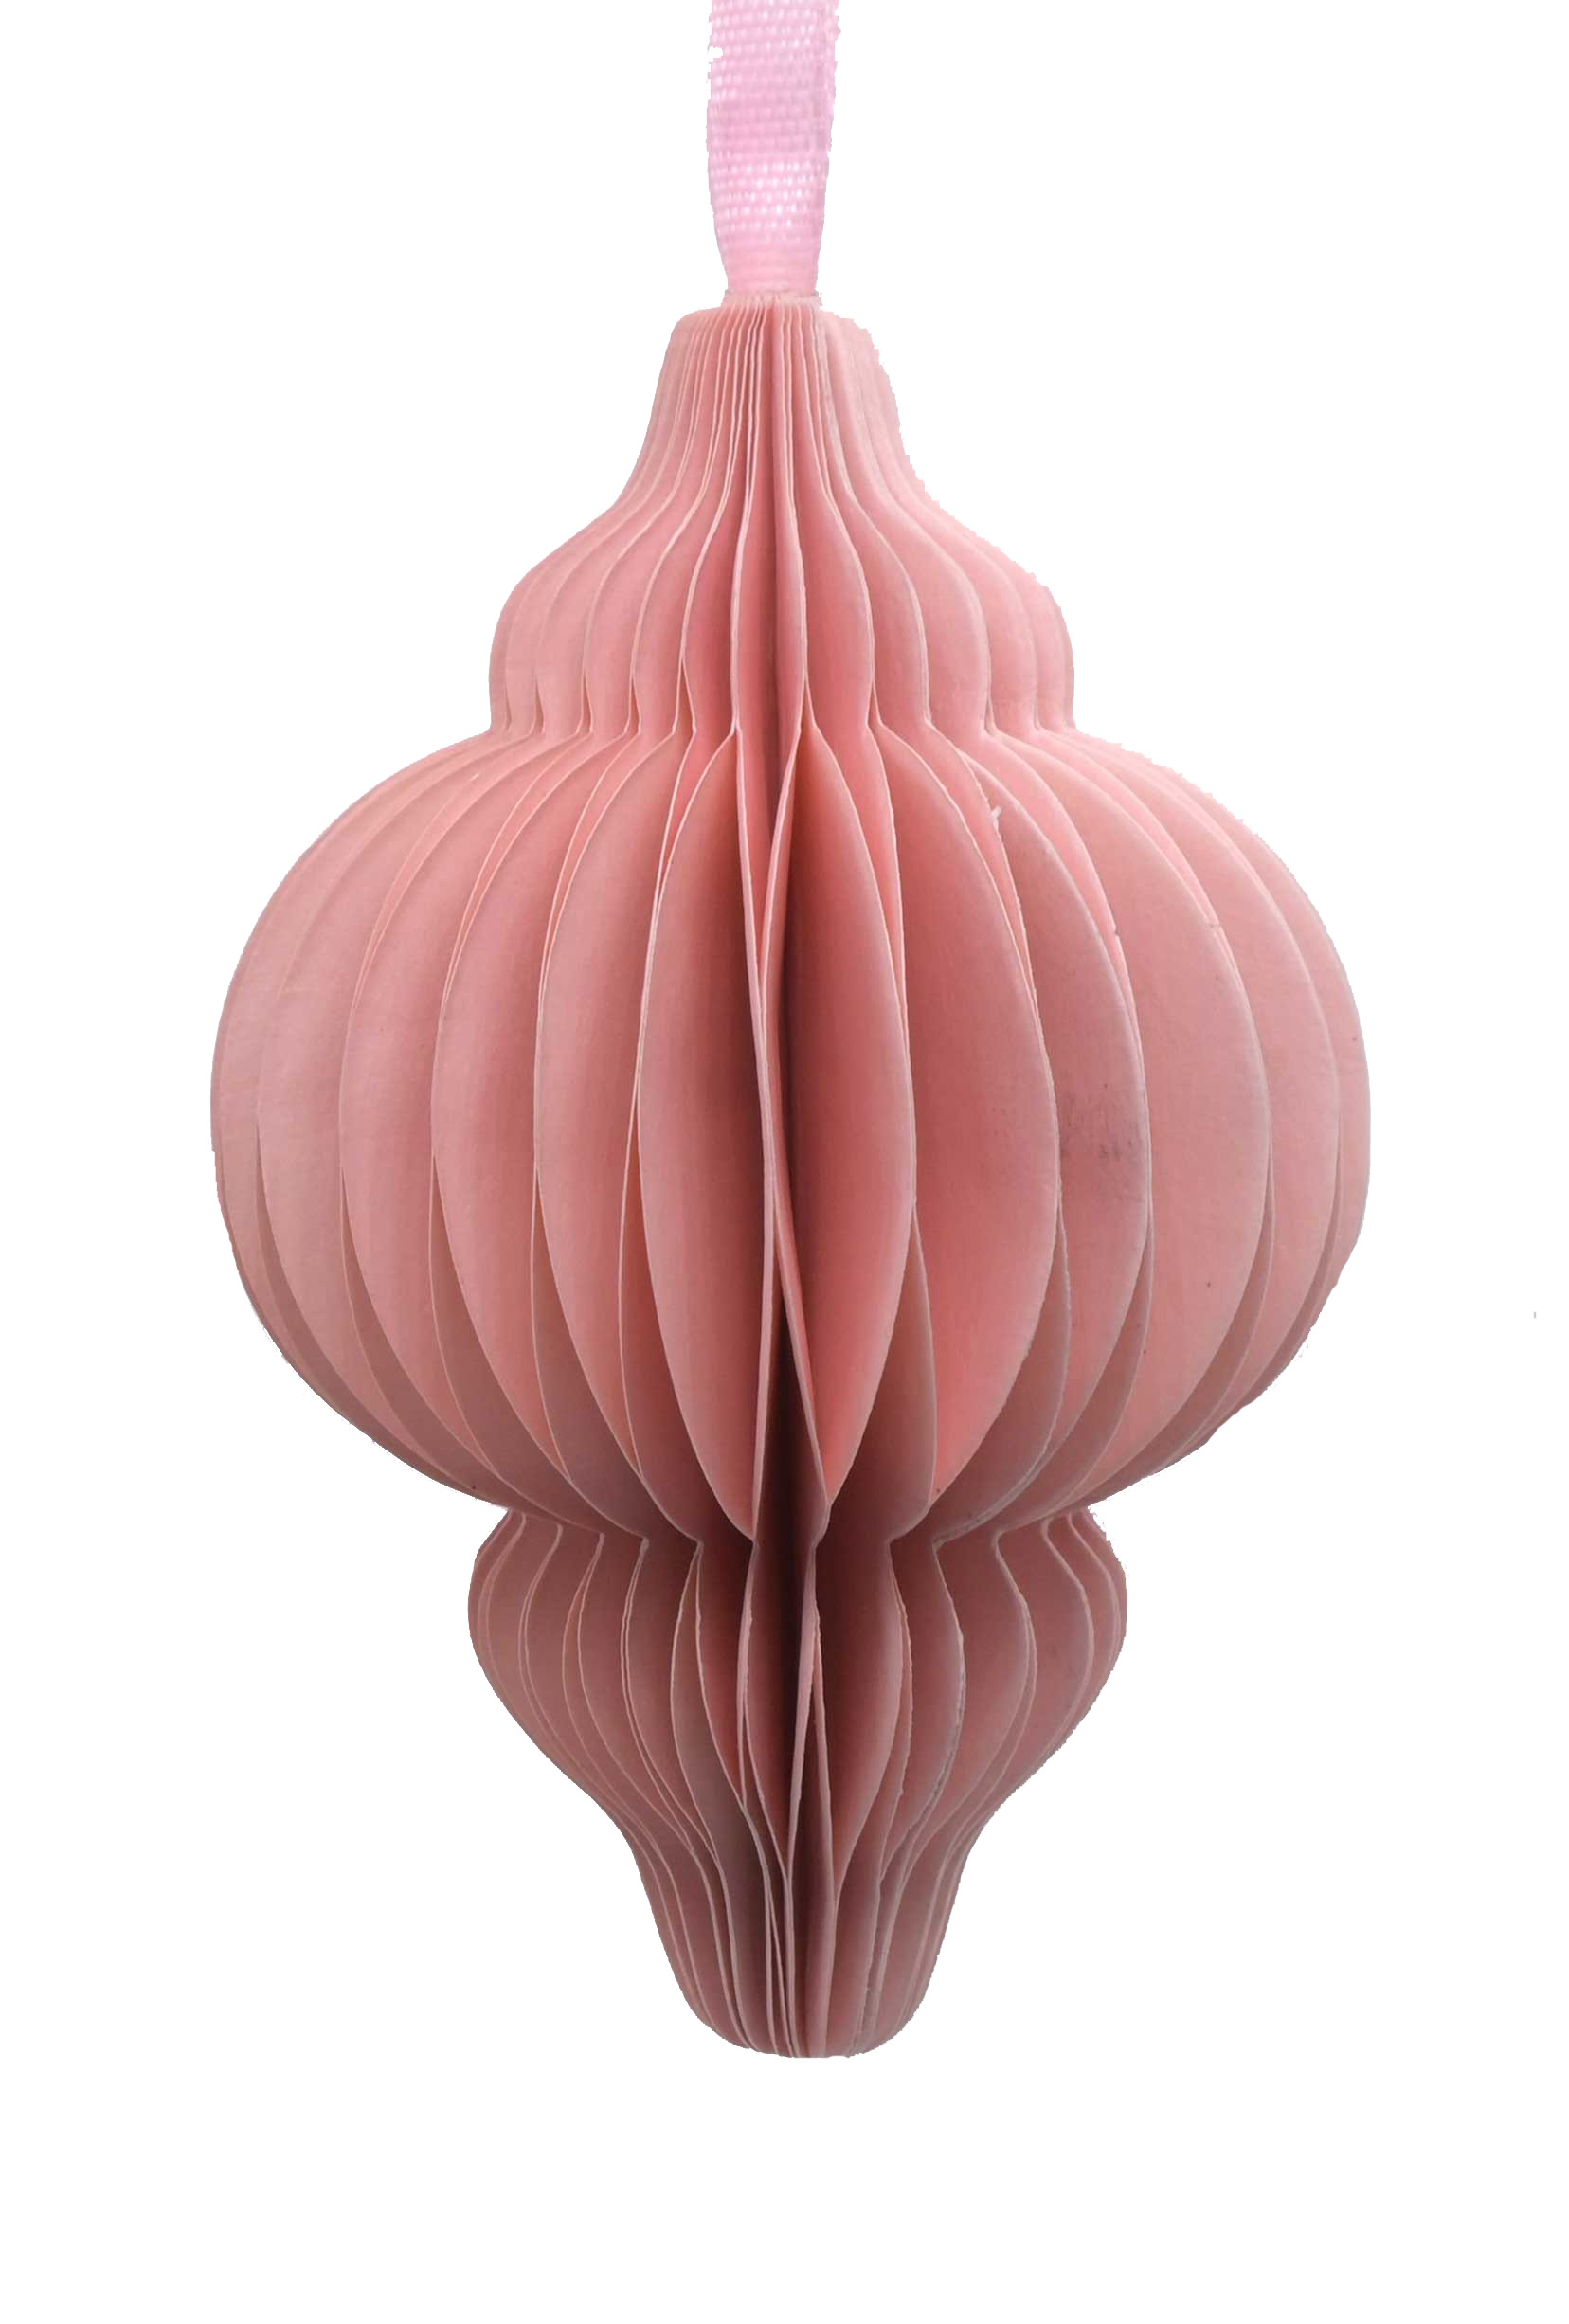 Brights Paper Honeycomb Finial Light Pink 10cm Gift